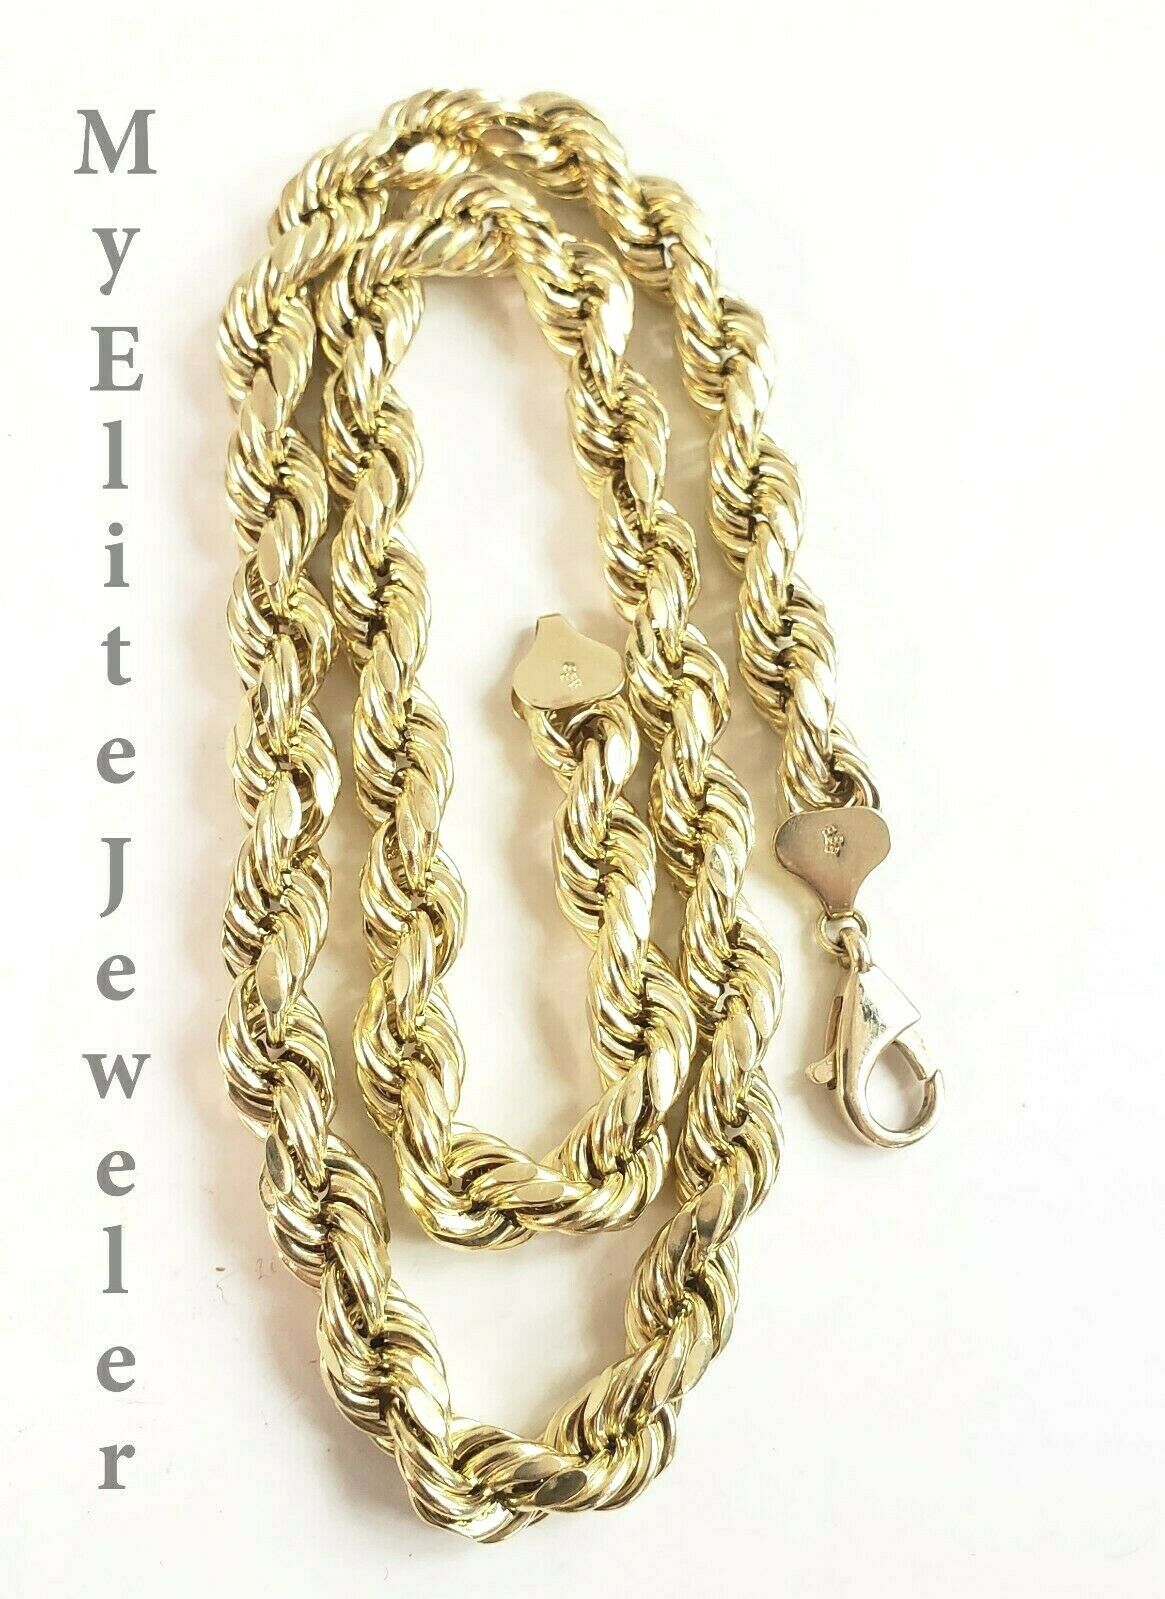 10K Gold Rope Chain Necklace 20 Inch 8mm Yellow Gold Lobster Lock , REAL GOLD